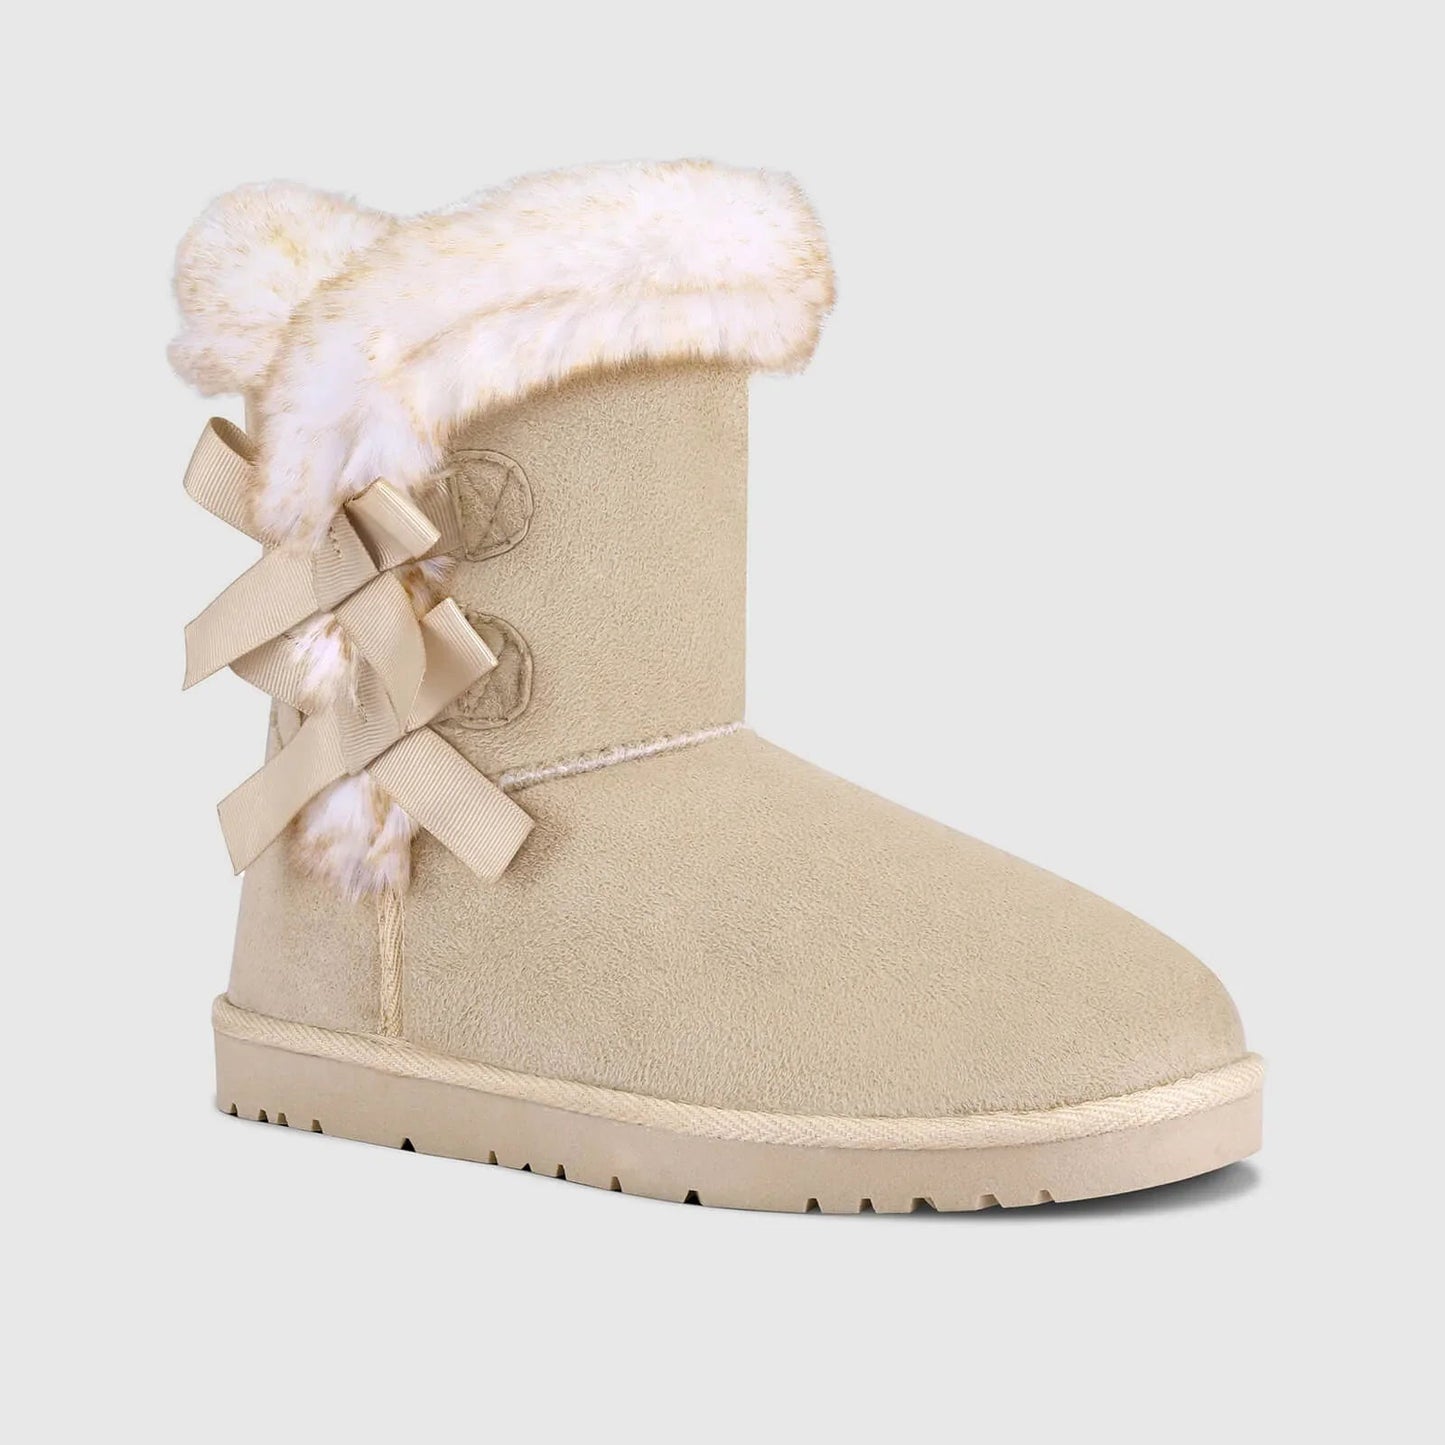 Remy Classic Snow Boots with Fur Lining in the Middle of the Shaft Rose & Remy